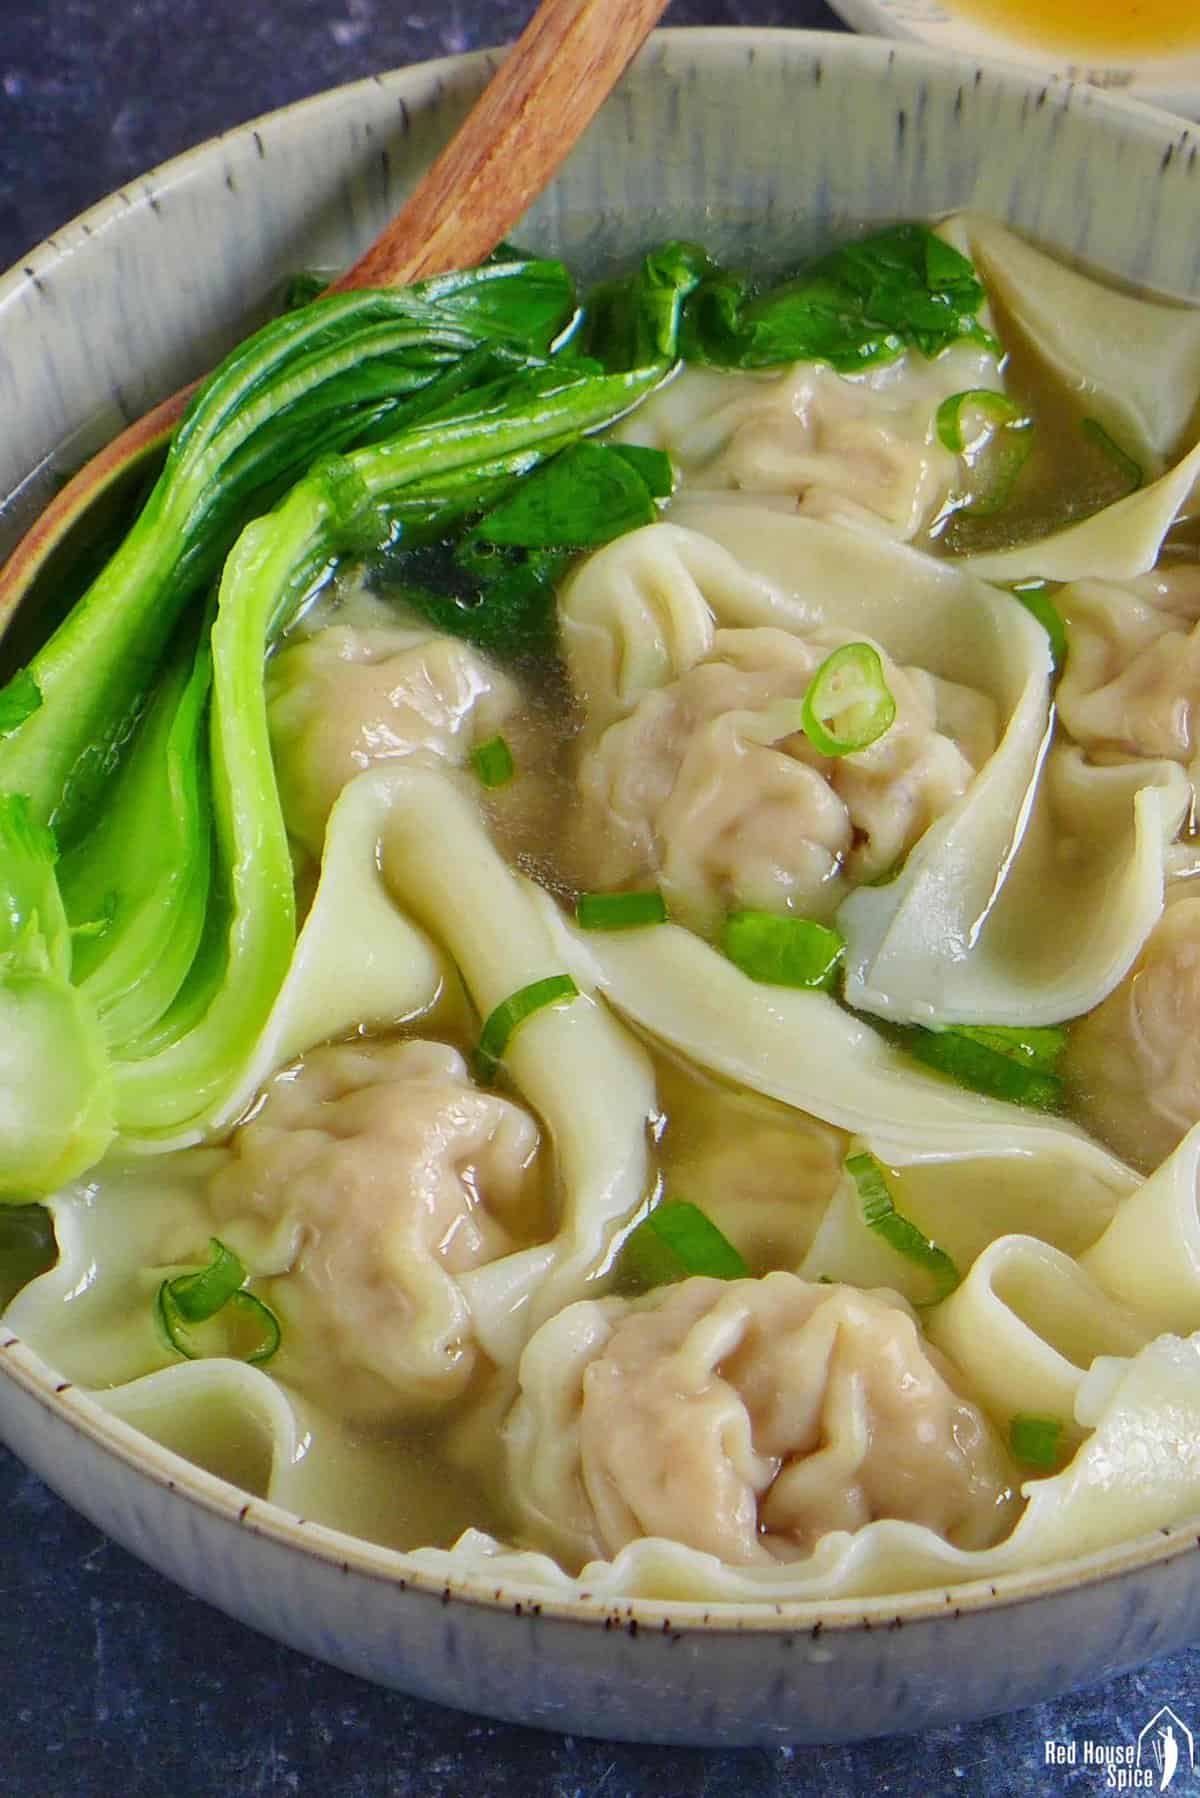 A bowl of wonton soup with Bok Choy and scallions.